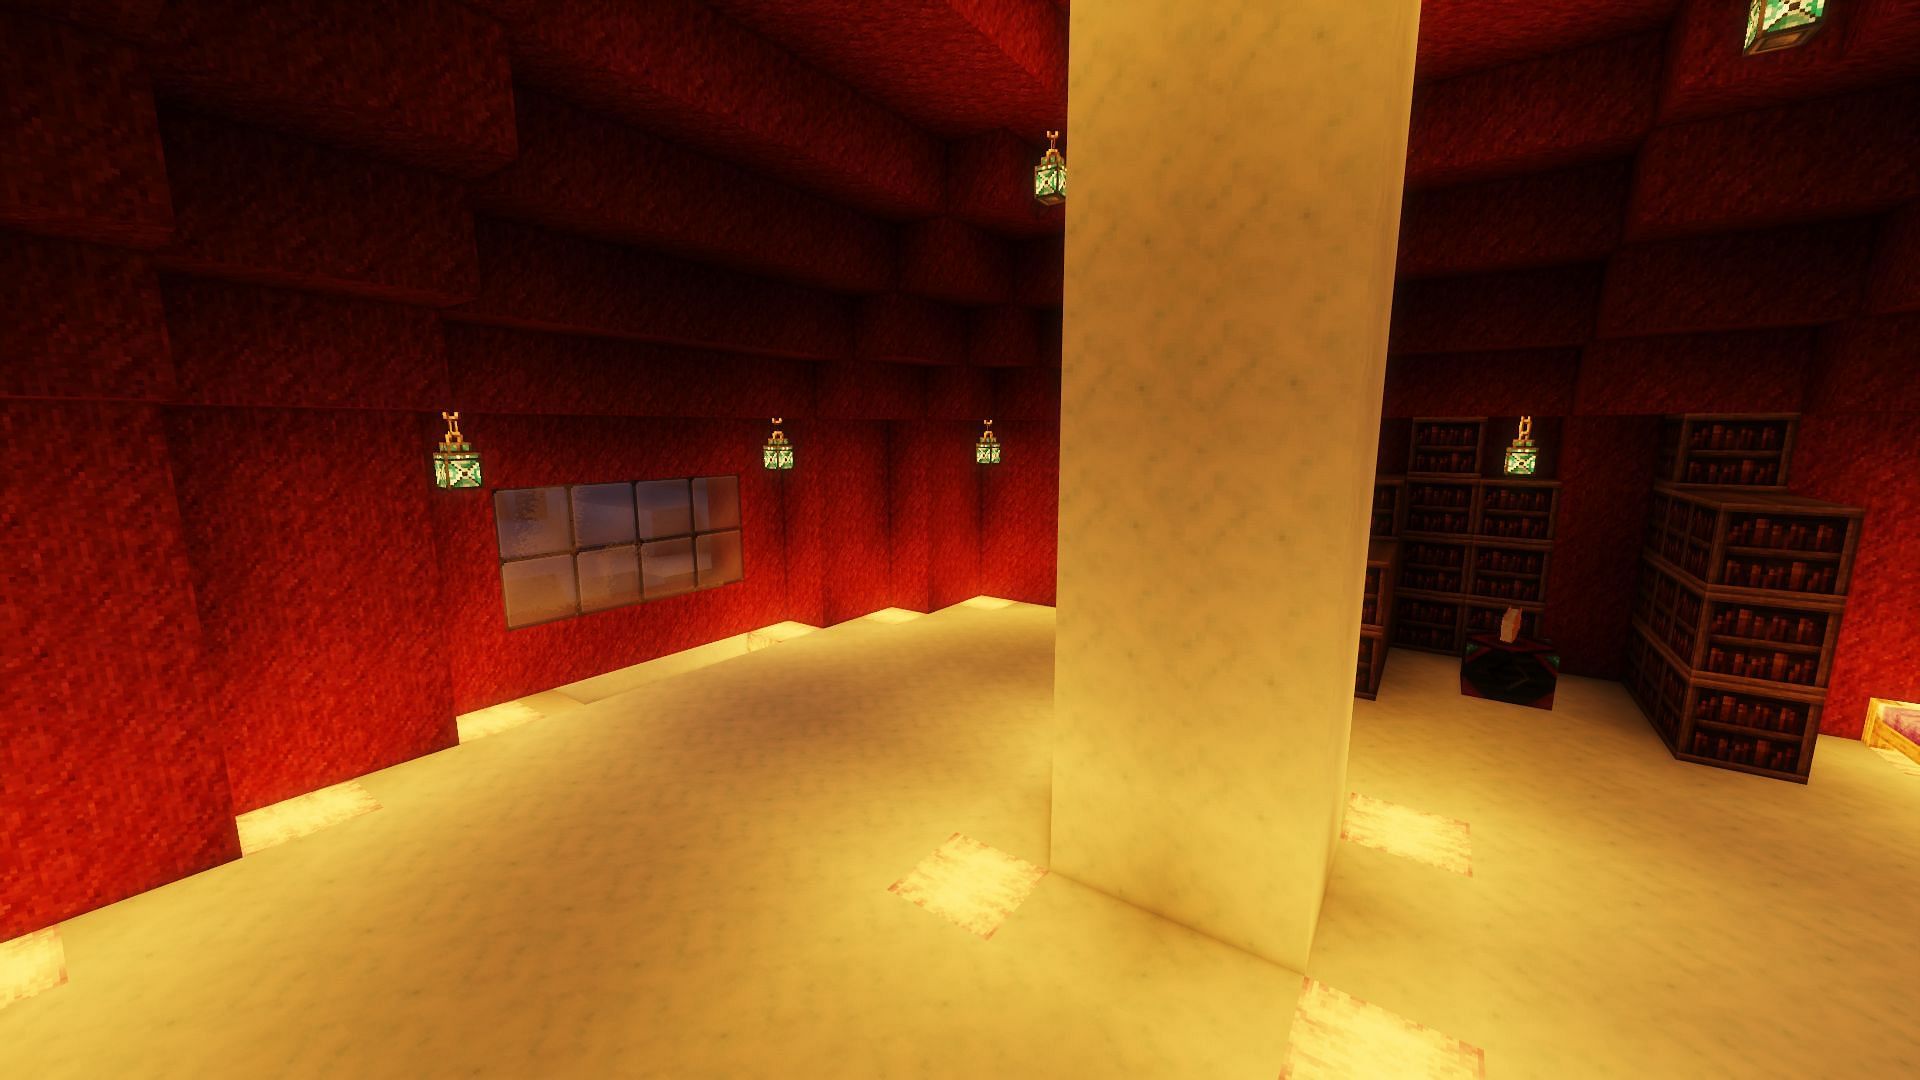 A window and inner pillar added to the igloo (Image via Minecraft)